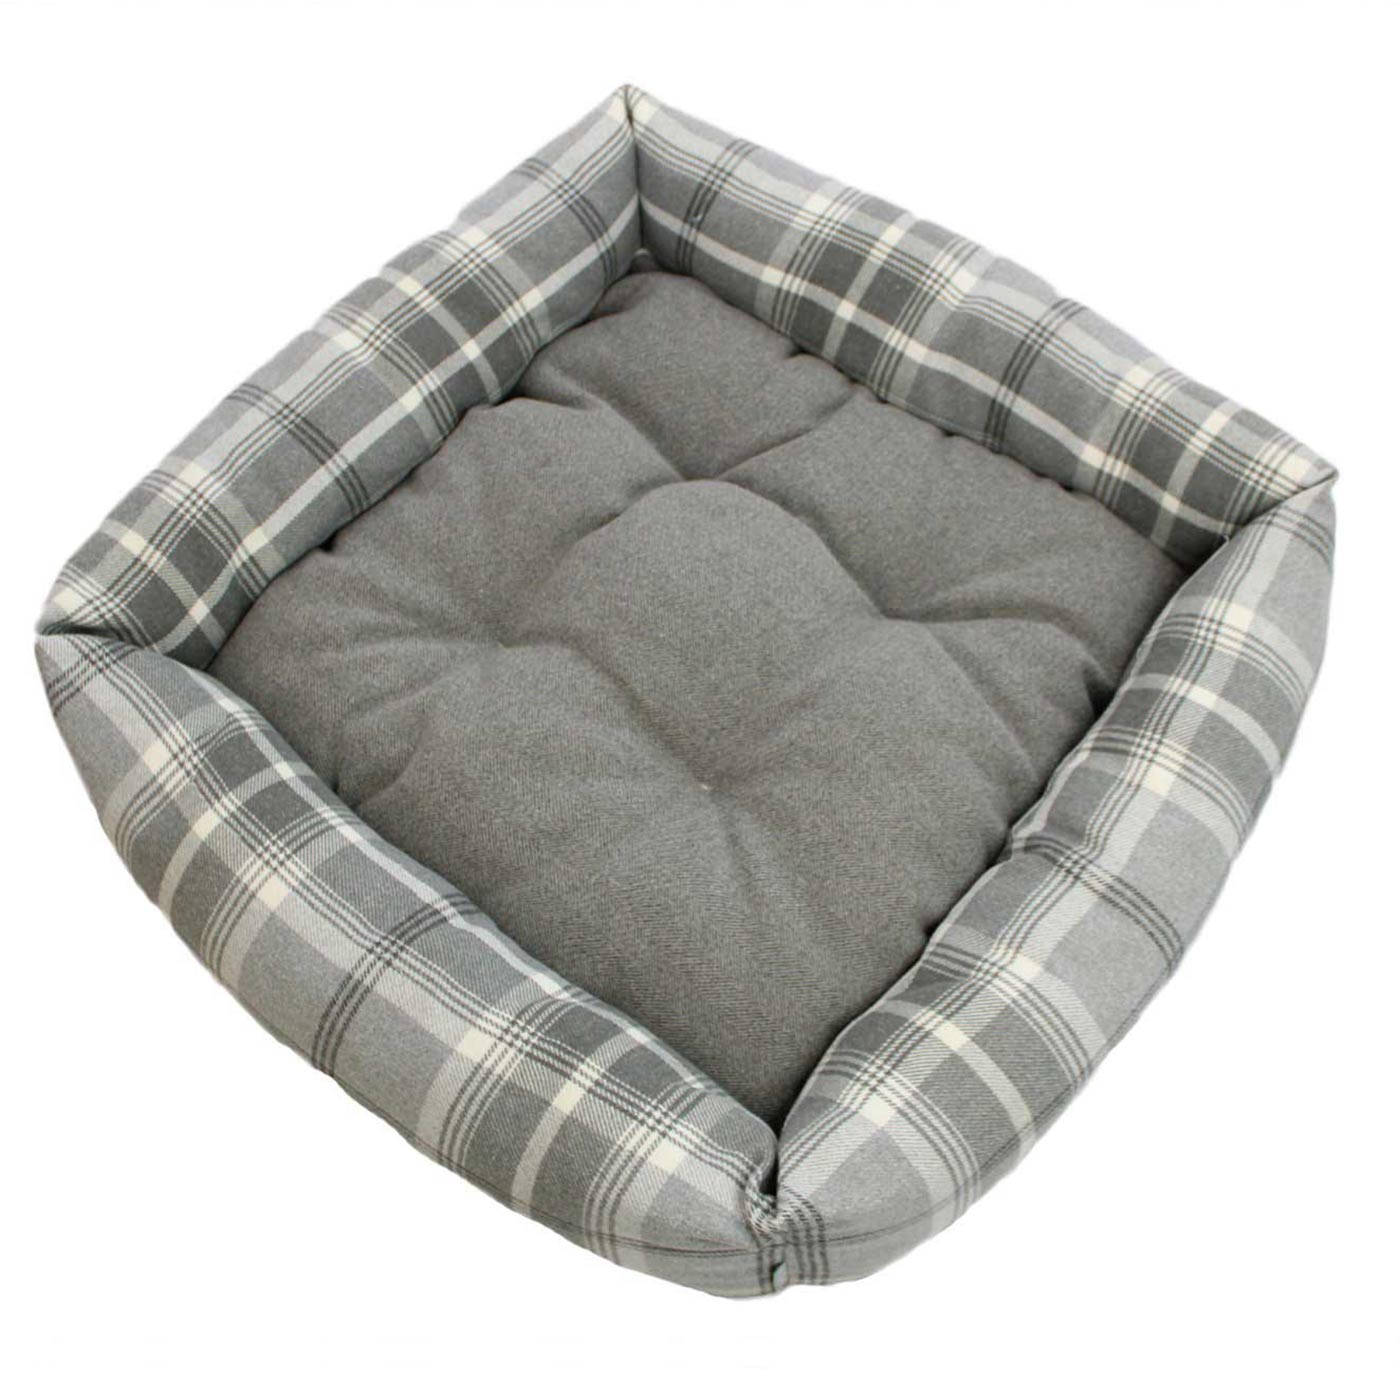 Luxury Handmade Box Bed For Dogs in Balmoral Dove Grey Tweed, Perfect For Your Pets Nap Time! Available To Personalise at Lords & Labradors